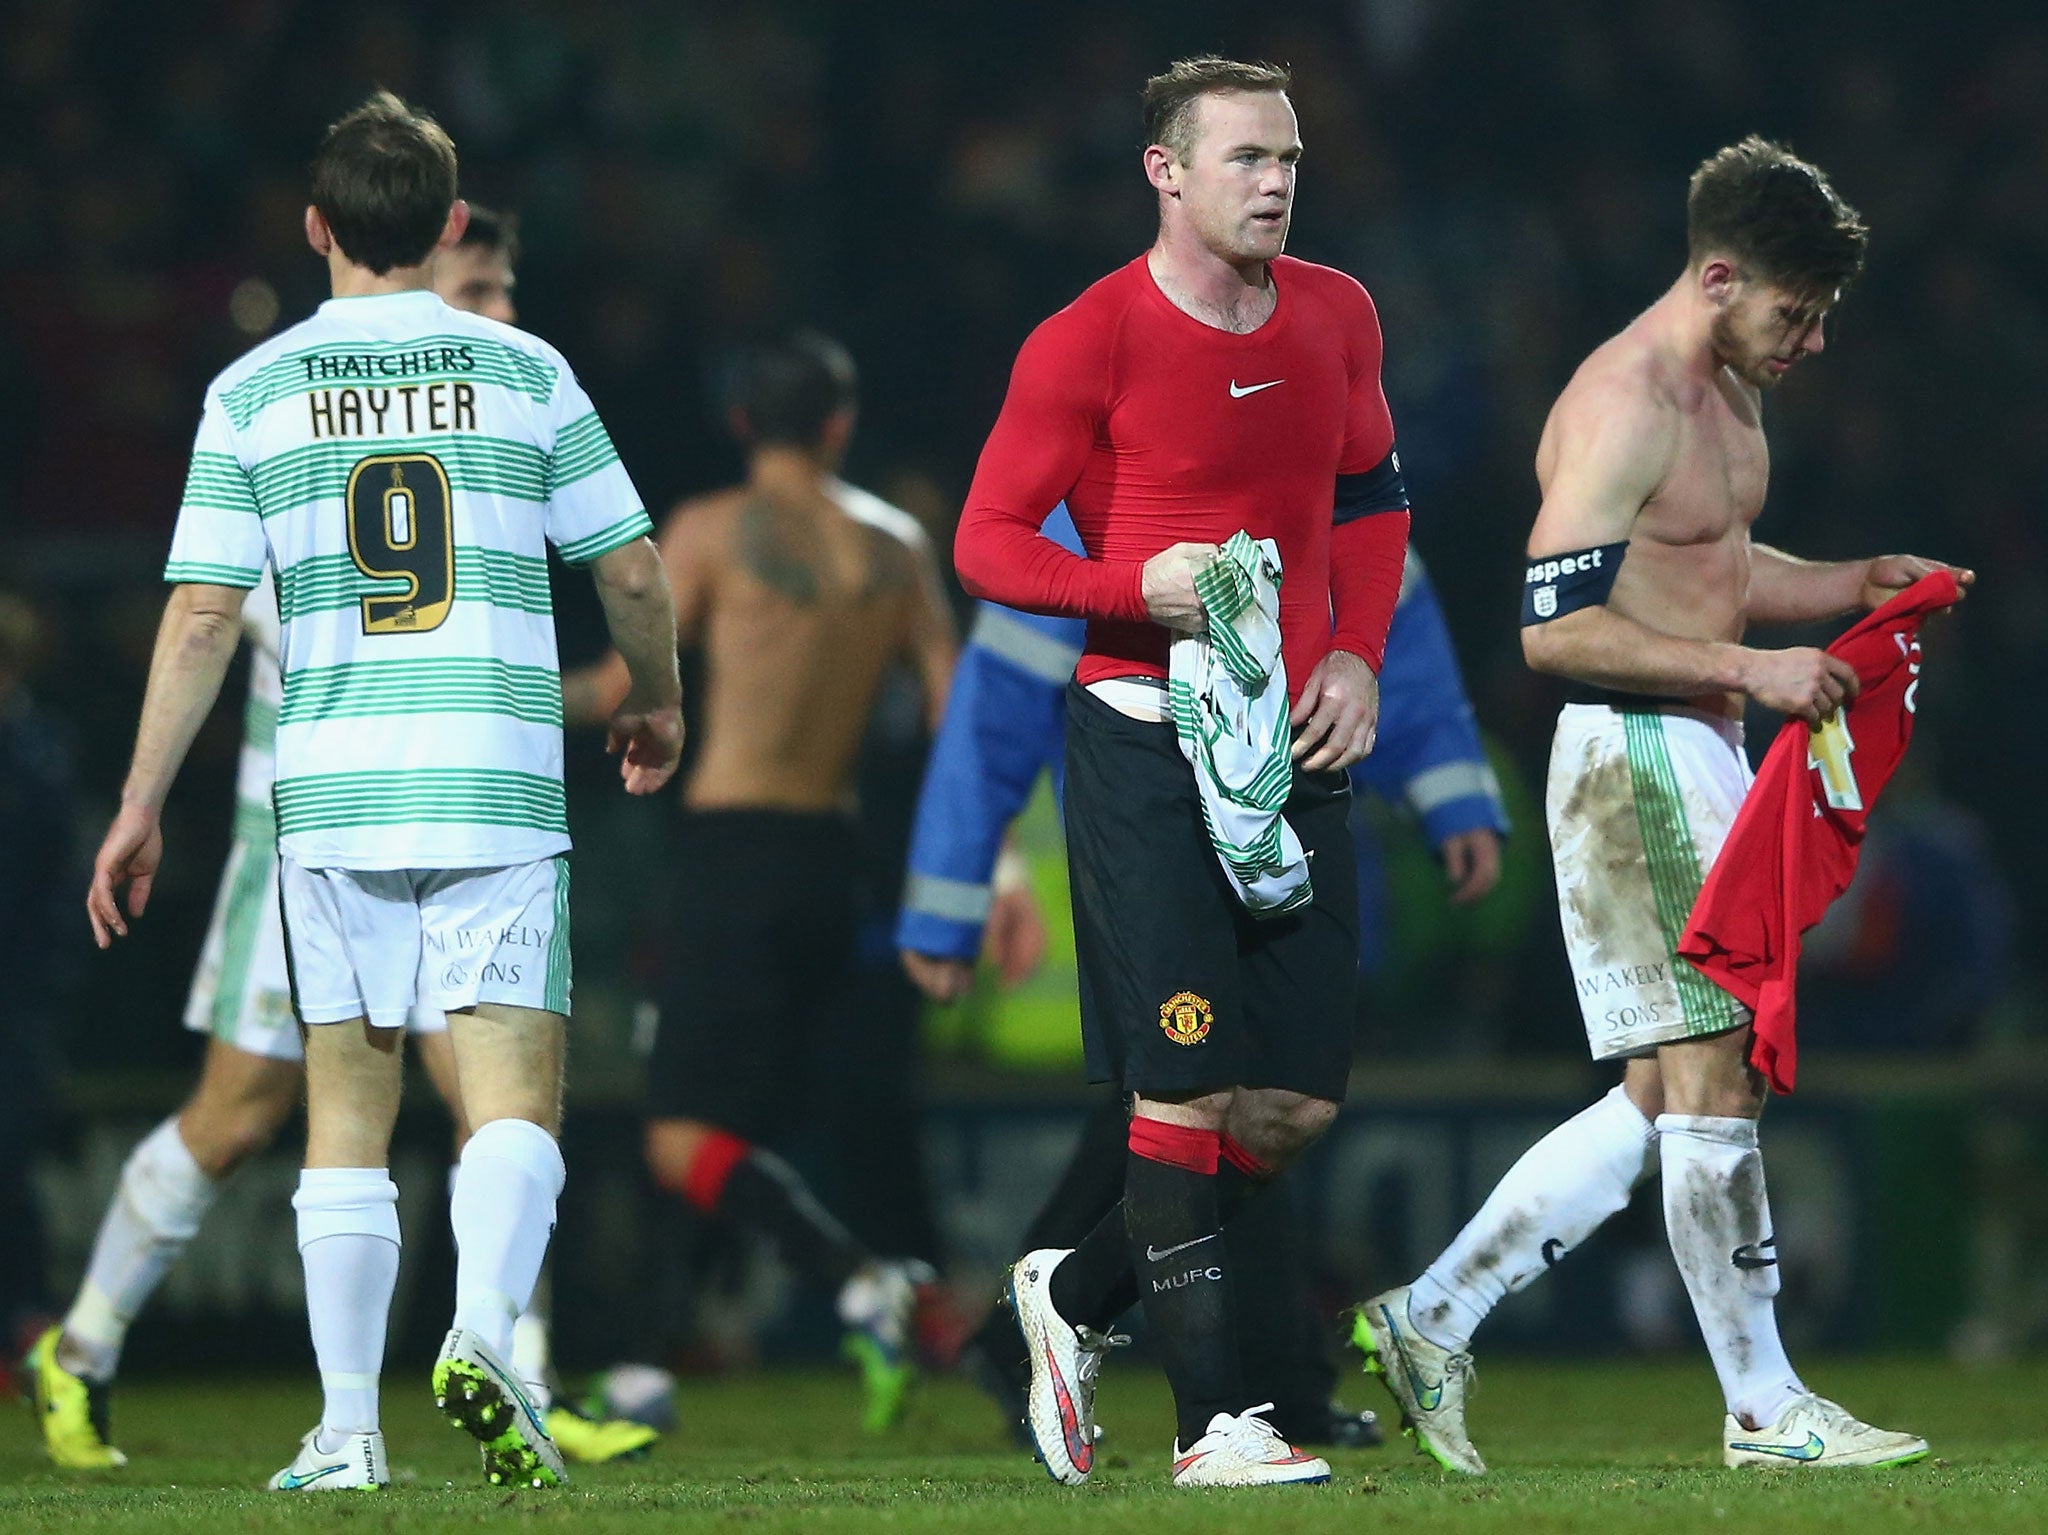 Joseph Edwards (R) of Yeovil Town swaps shirts with Wayne Rooney in the third round of the FA Cup